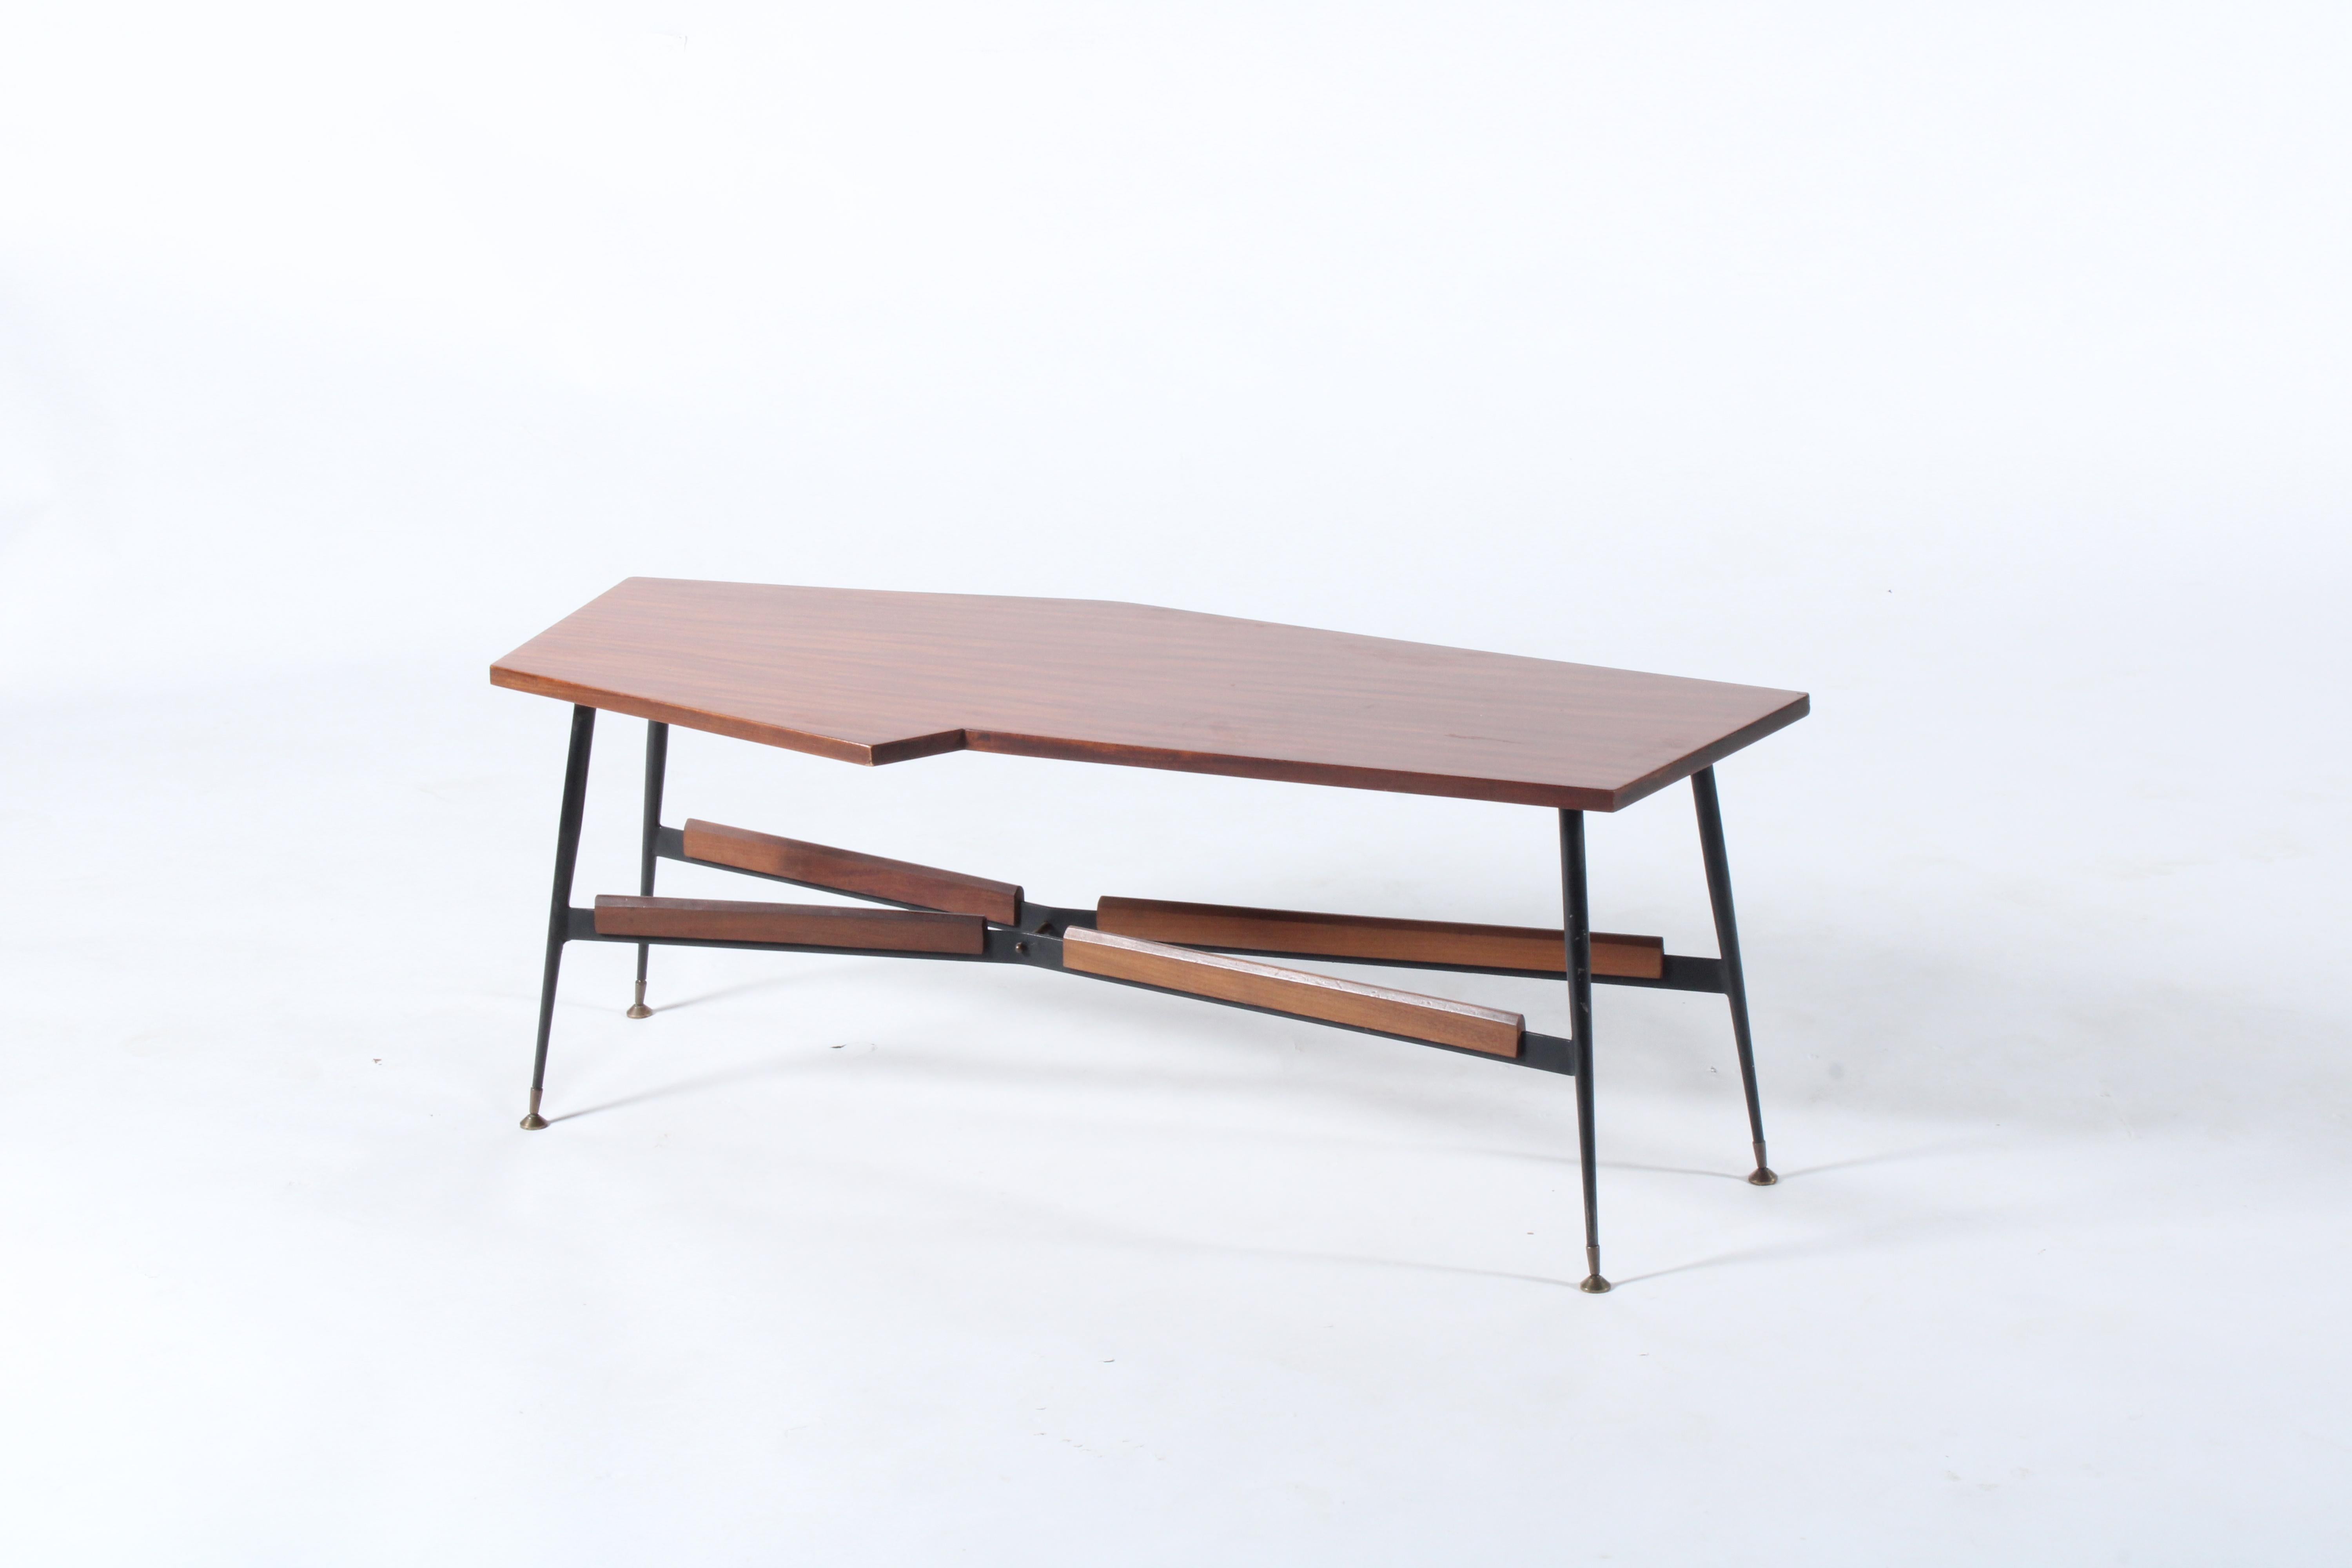 An unusual yet super stylish original mid century Italian coffee table. Dating from the 1950’s and sourced in Turin from a private collector this piece is presented in excellent untouched original vintage condition. The angular polished mahogany top